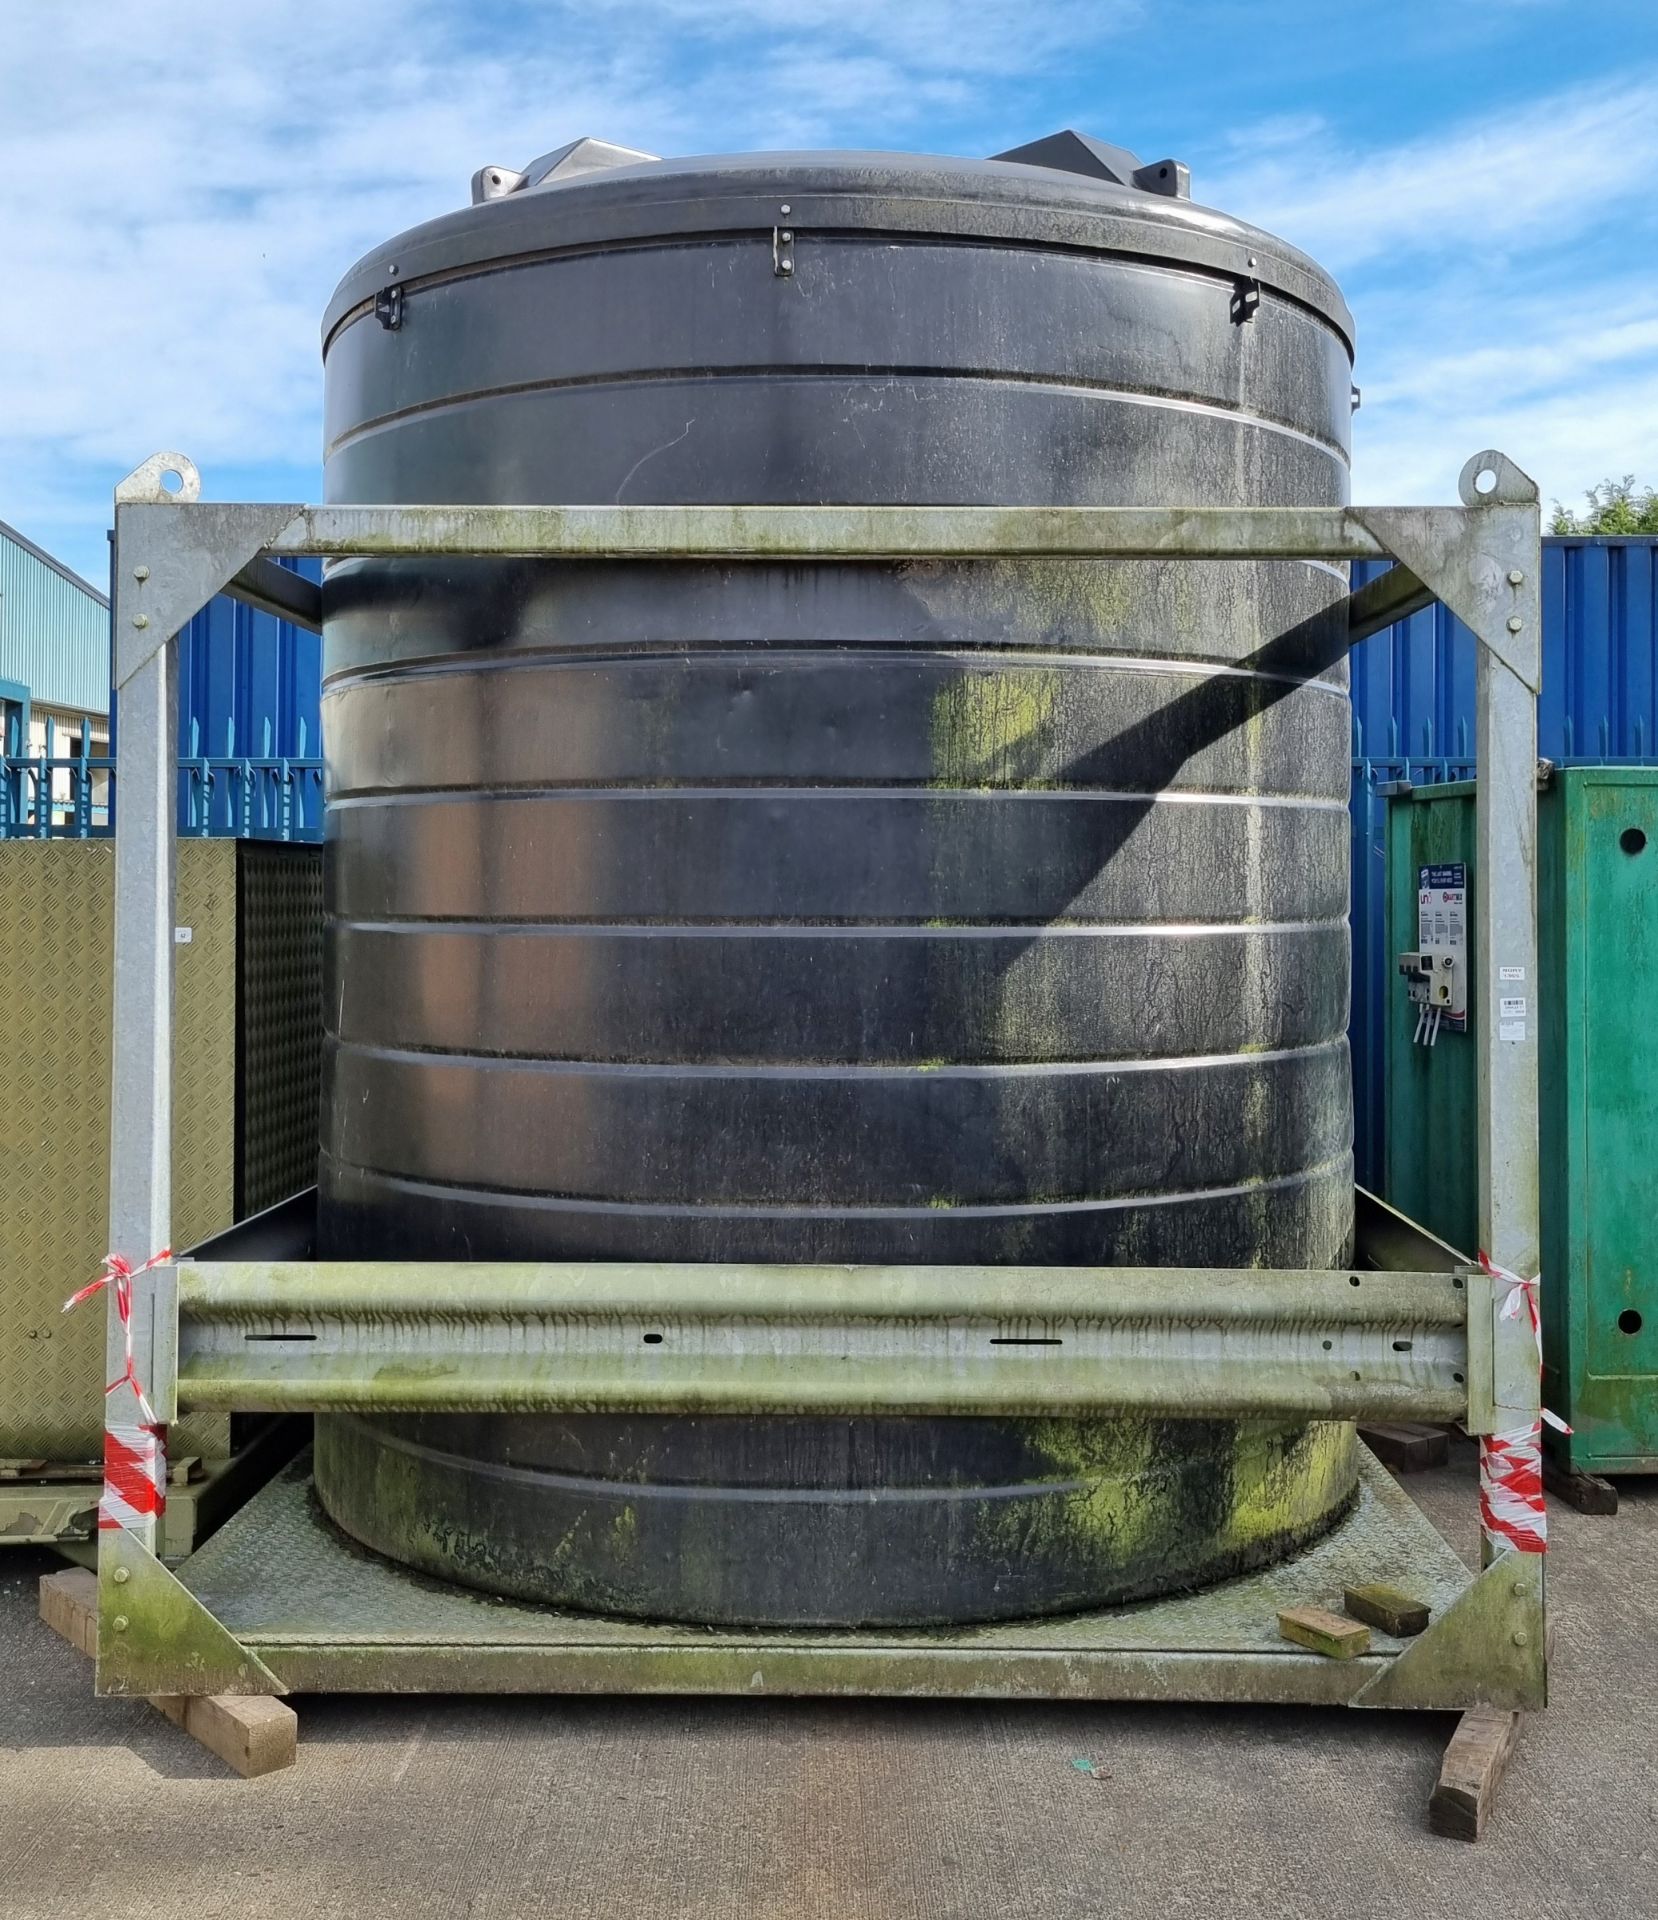 Diesel tank with lifting cage - W 3000 x D 3400 x H 4000mm